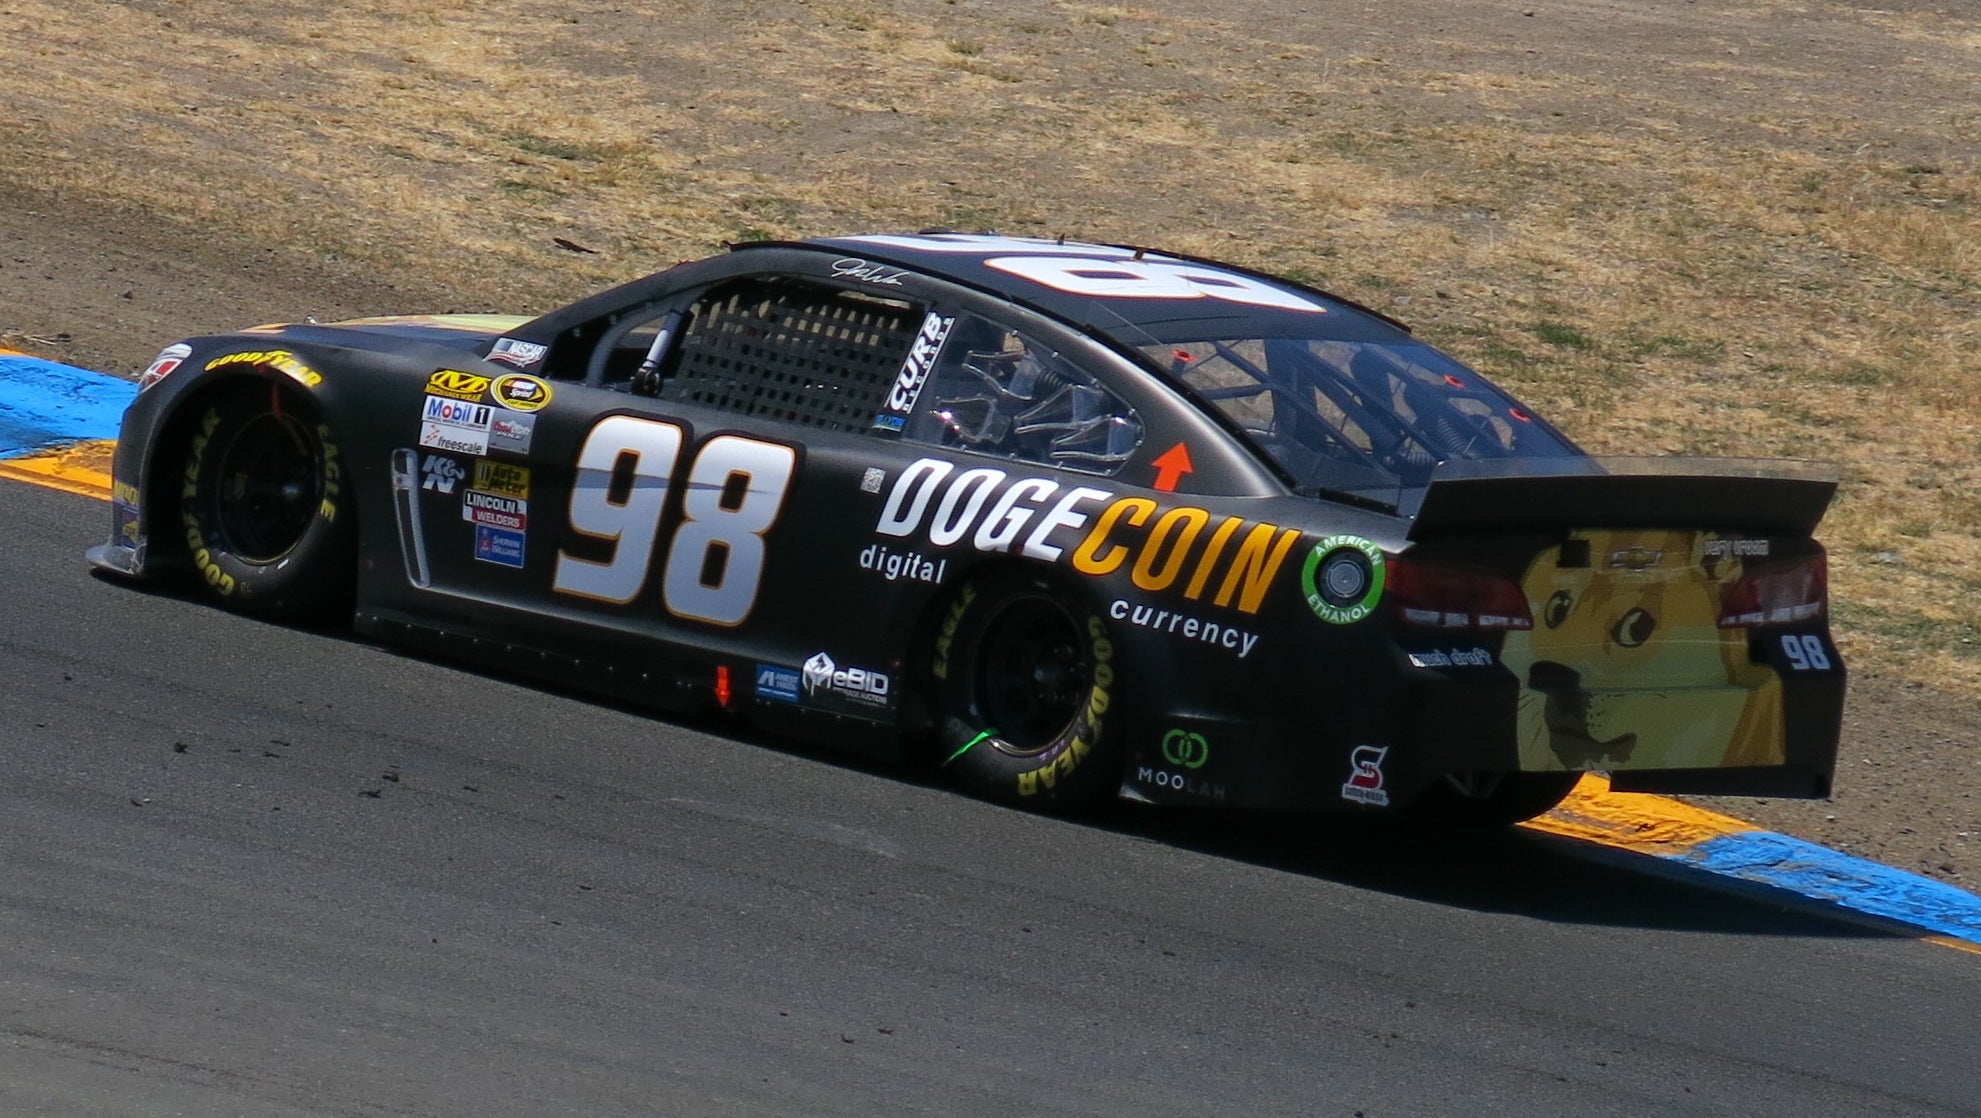 Such Speed, Much Wow! Dogecoin To Make A Reappearance At NASCAR